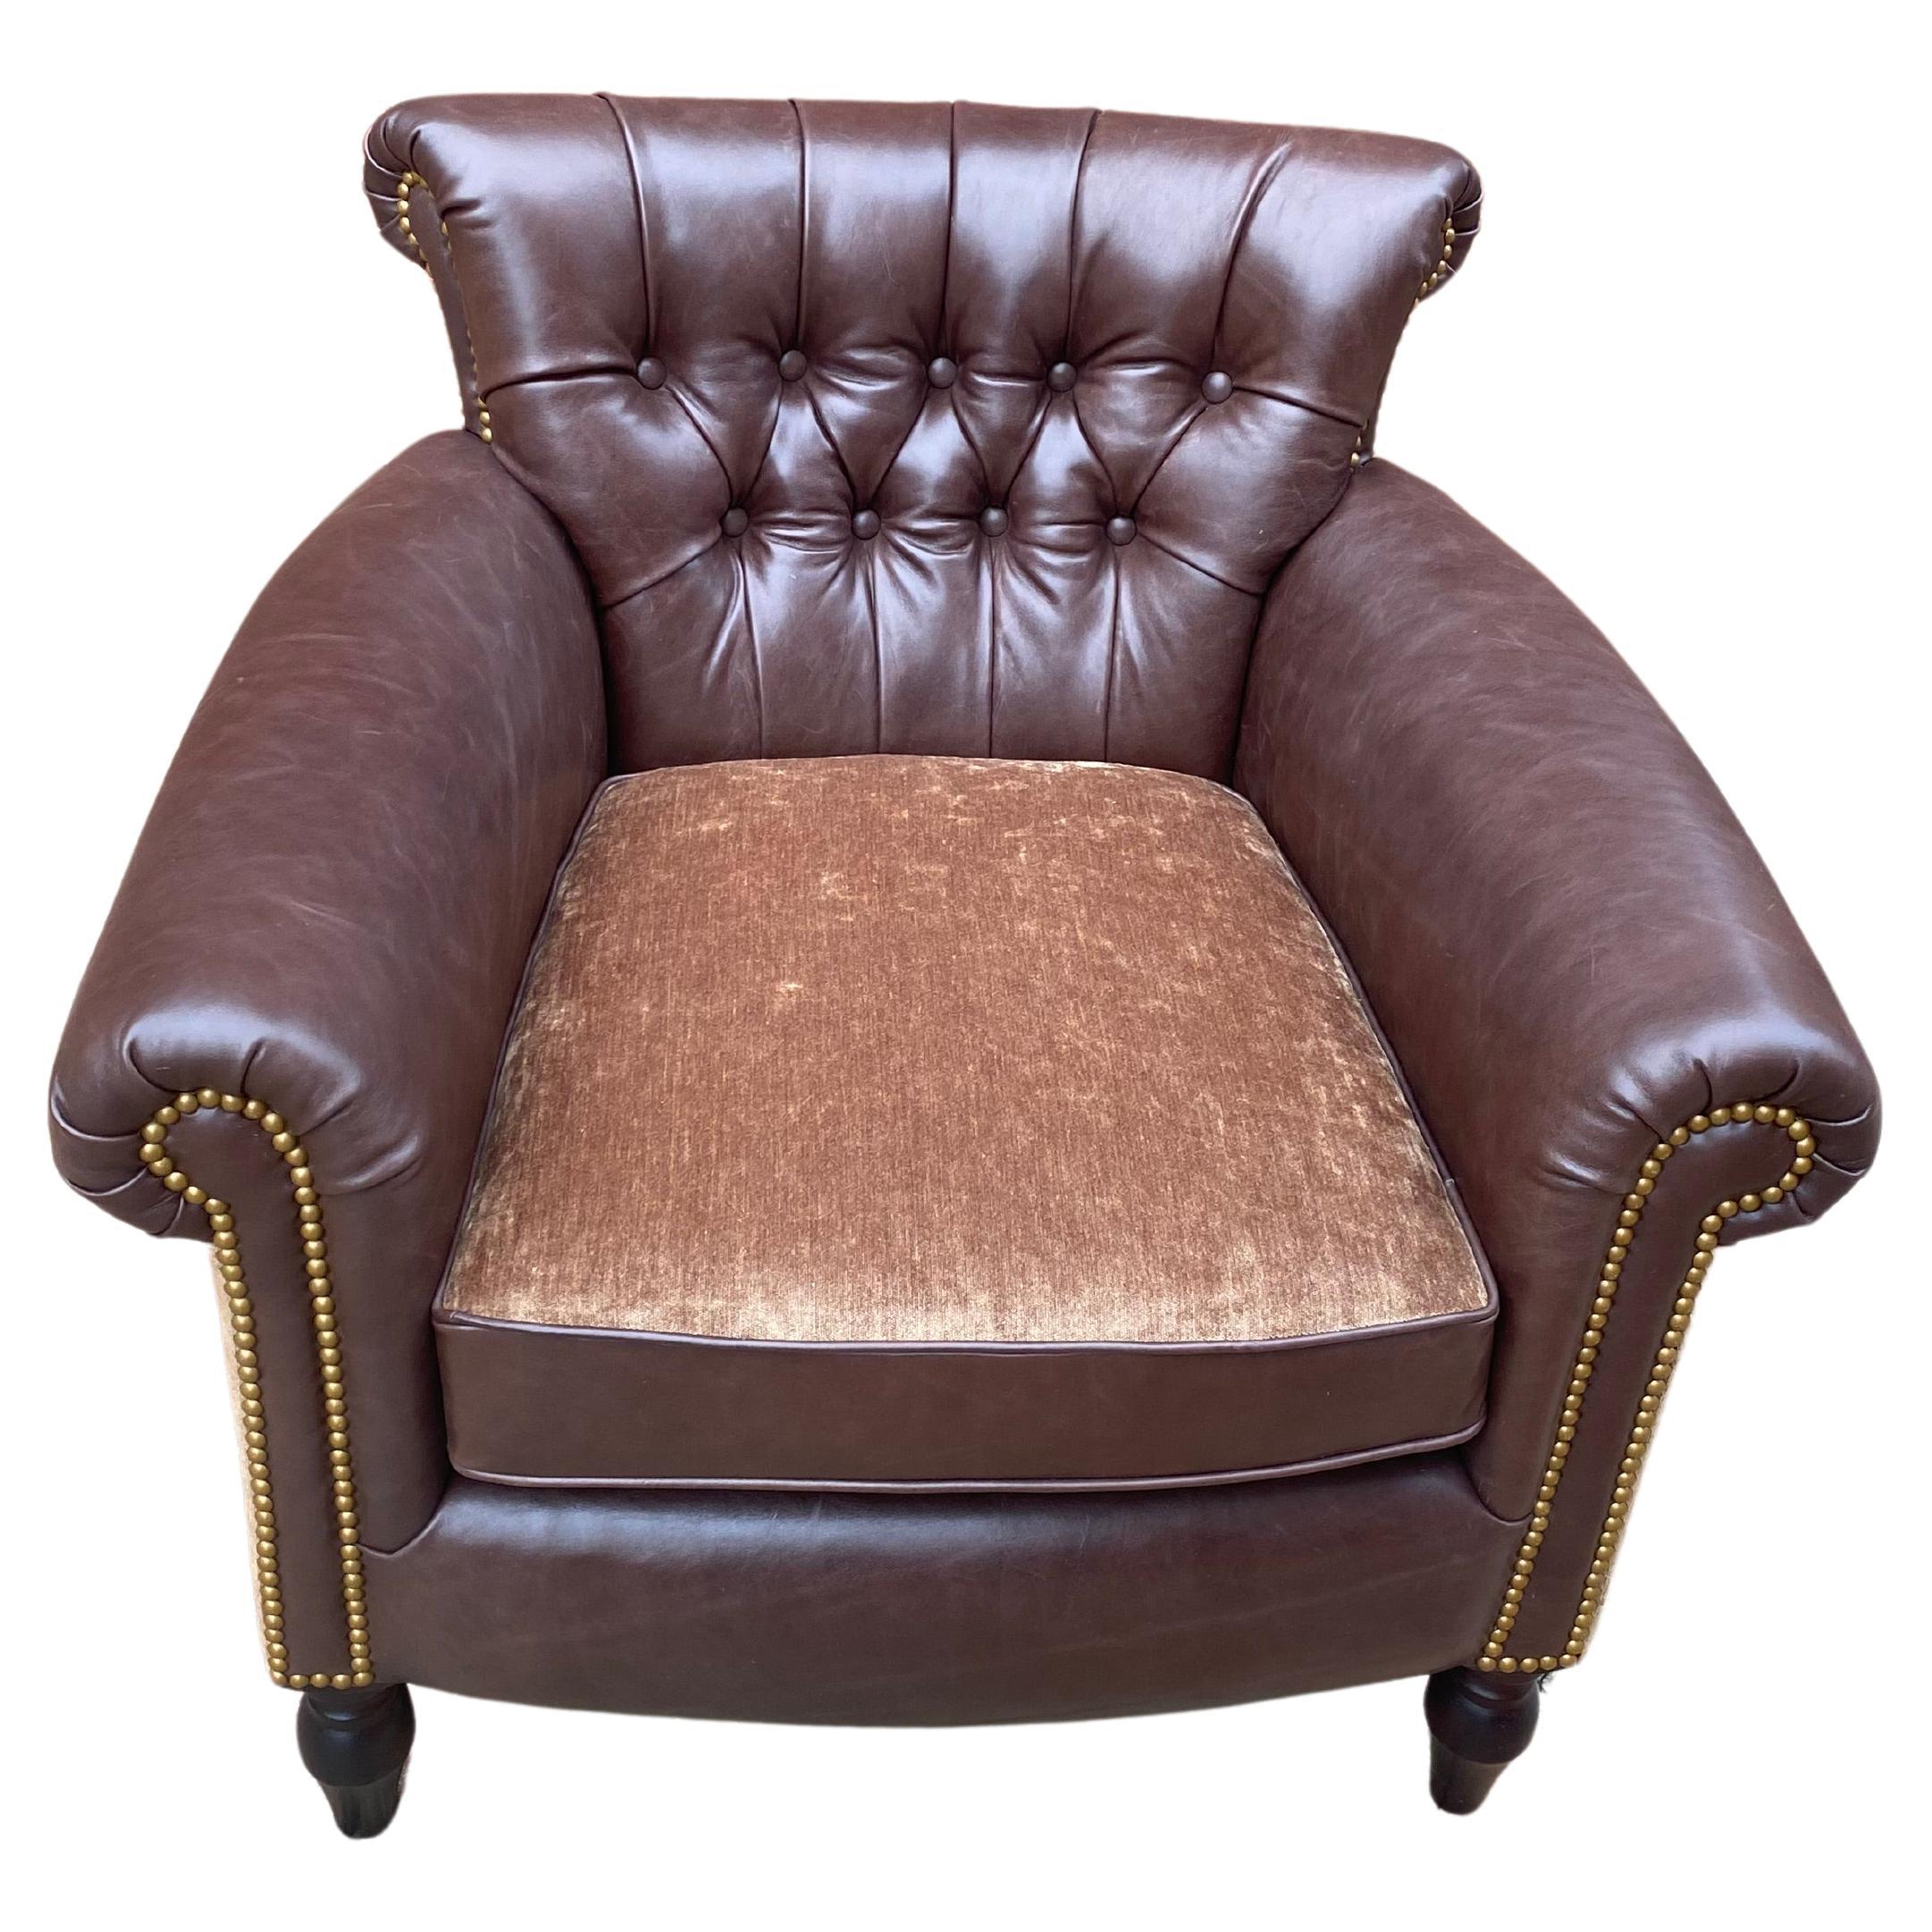 Impressive large tufted George Smith library Club chair with nailhead trim newly reupholstered in a chocolate leather on the inside back, arms, and perimeter and cording of the seat.  There's coordinating velvet mohair on the exterior back, sides